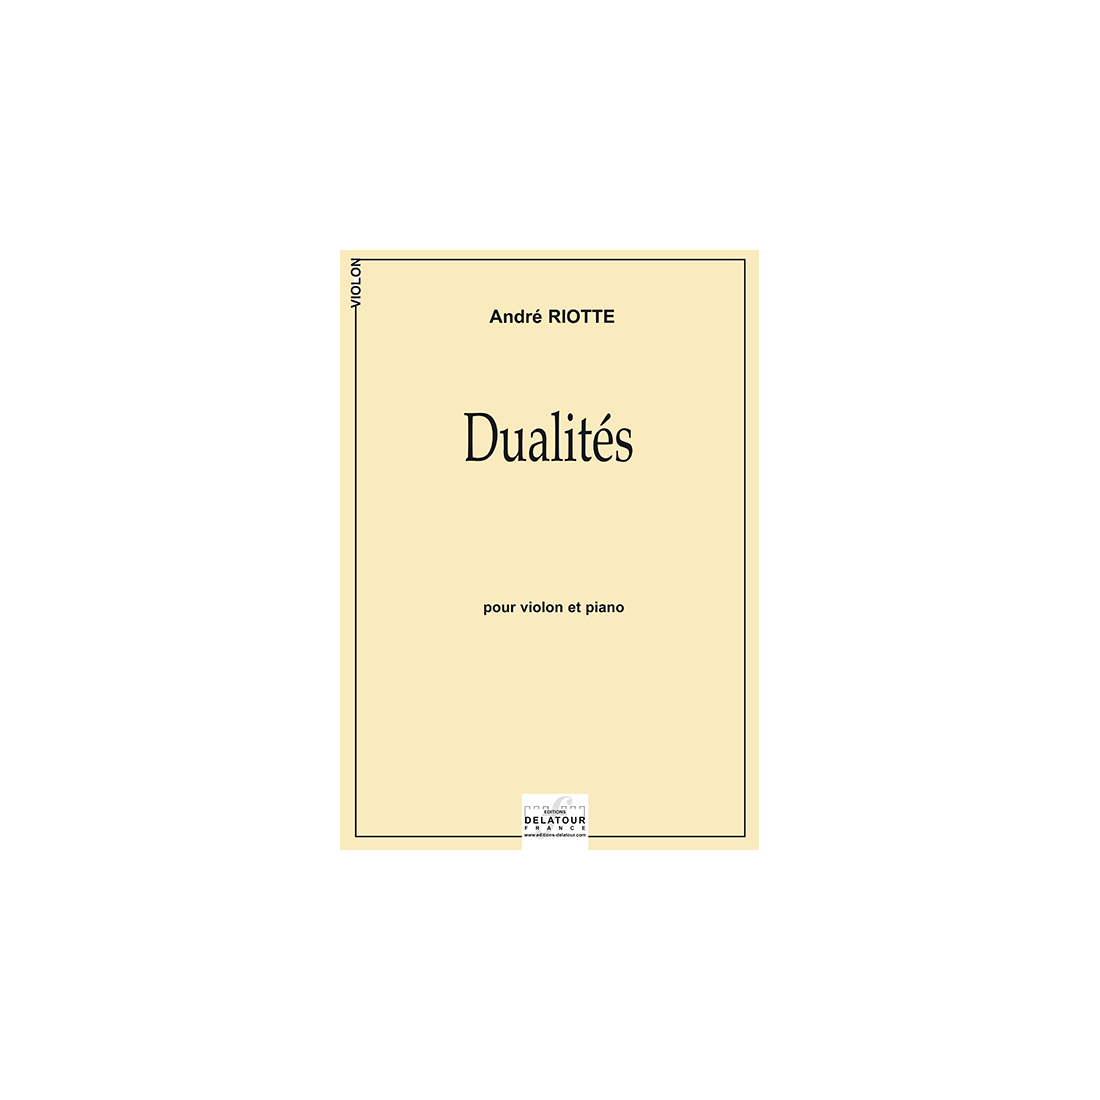 Dualités for violin and piano